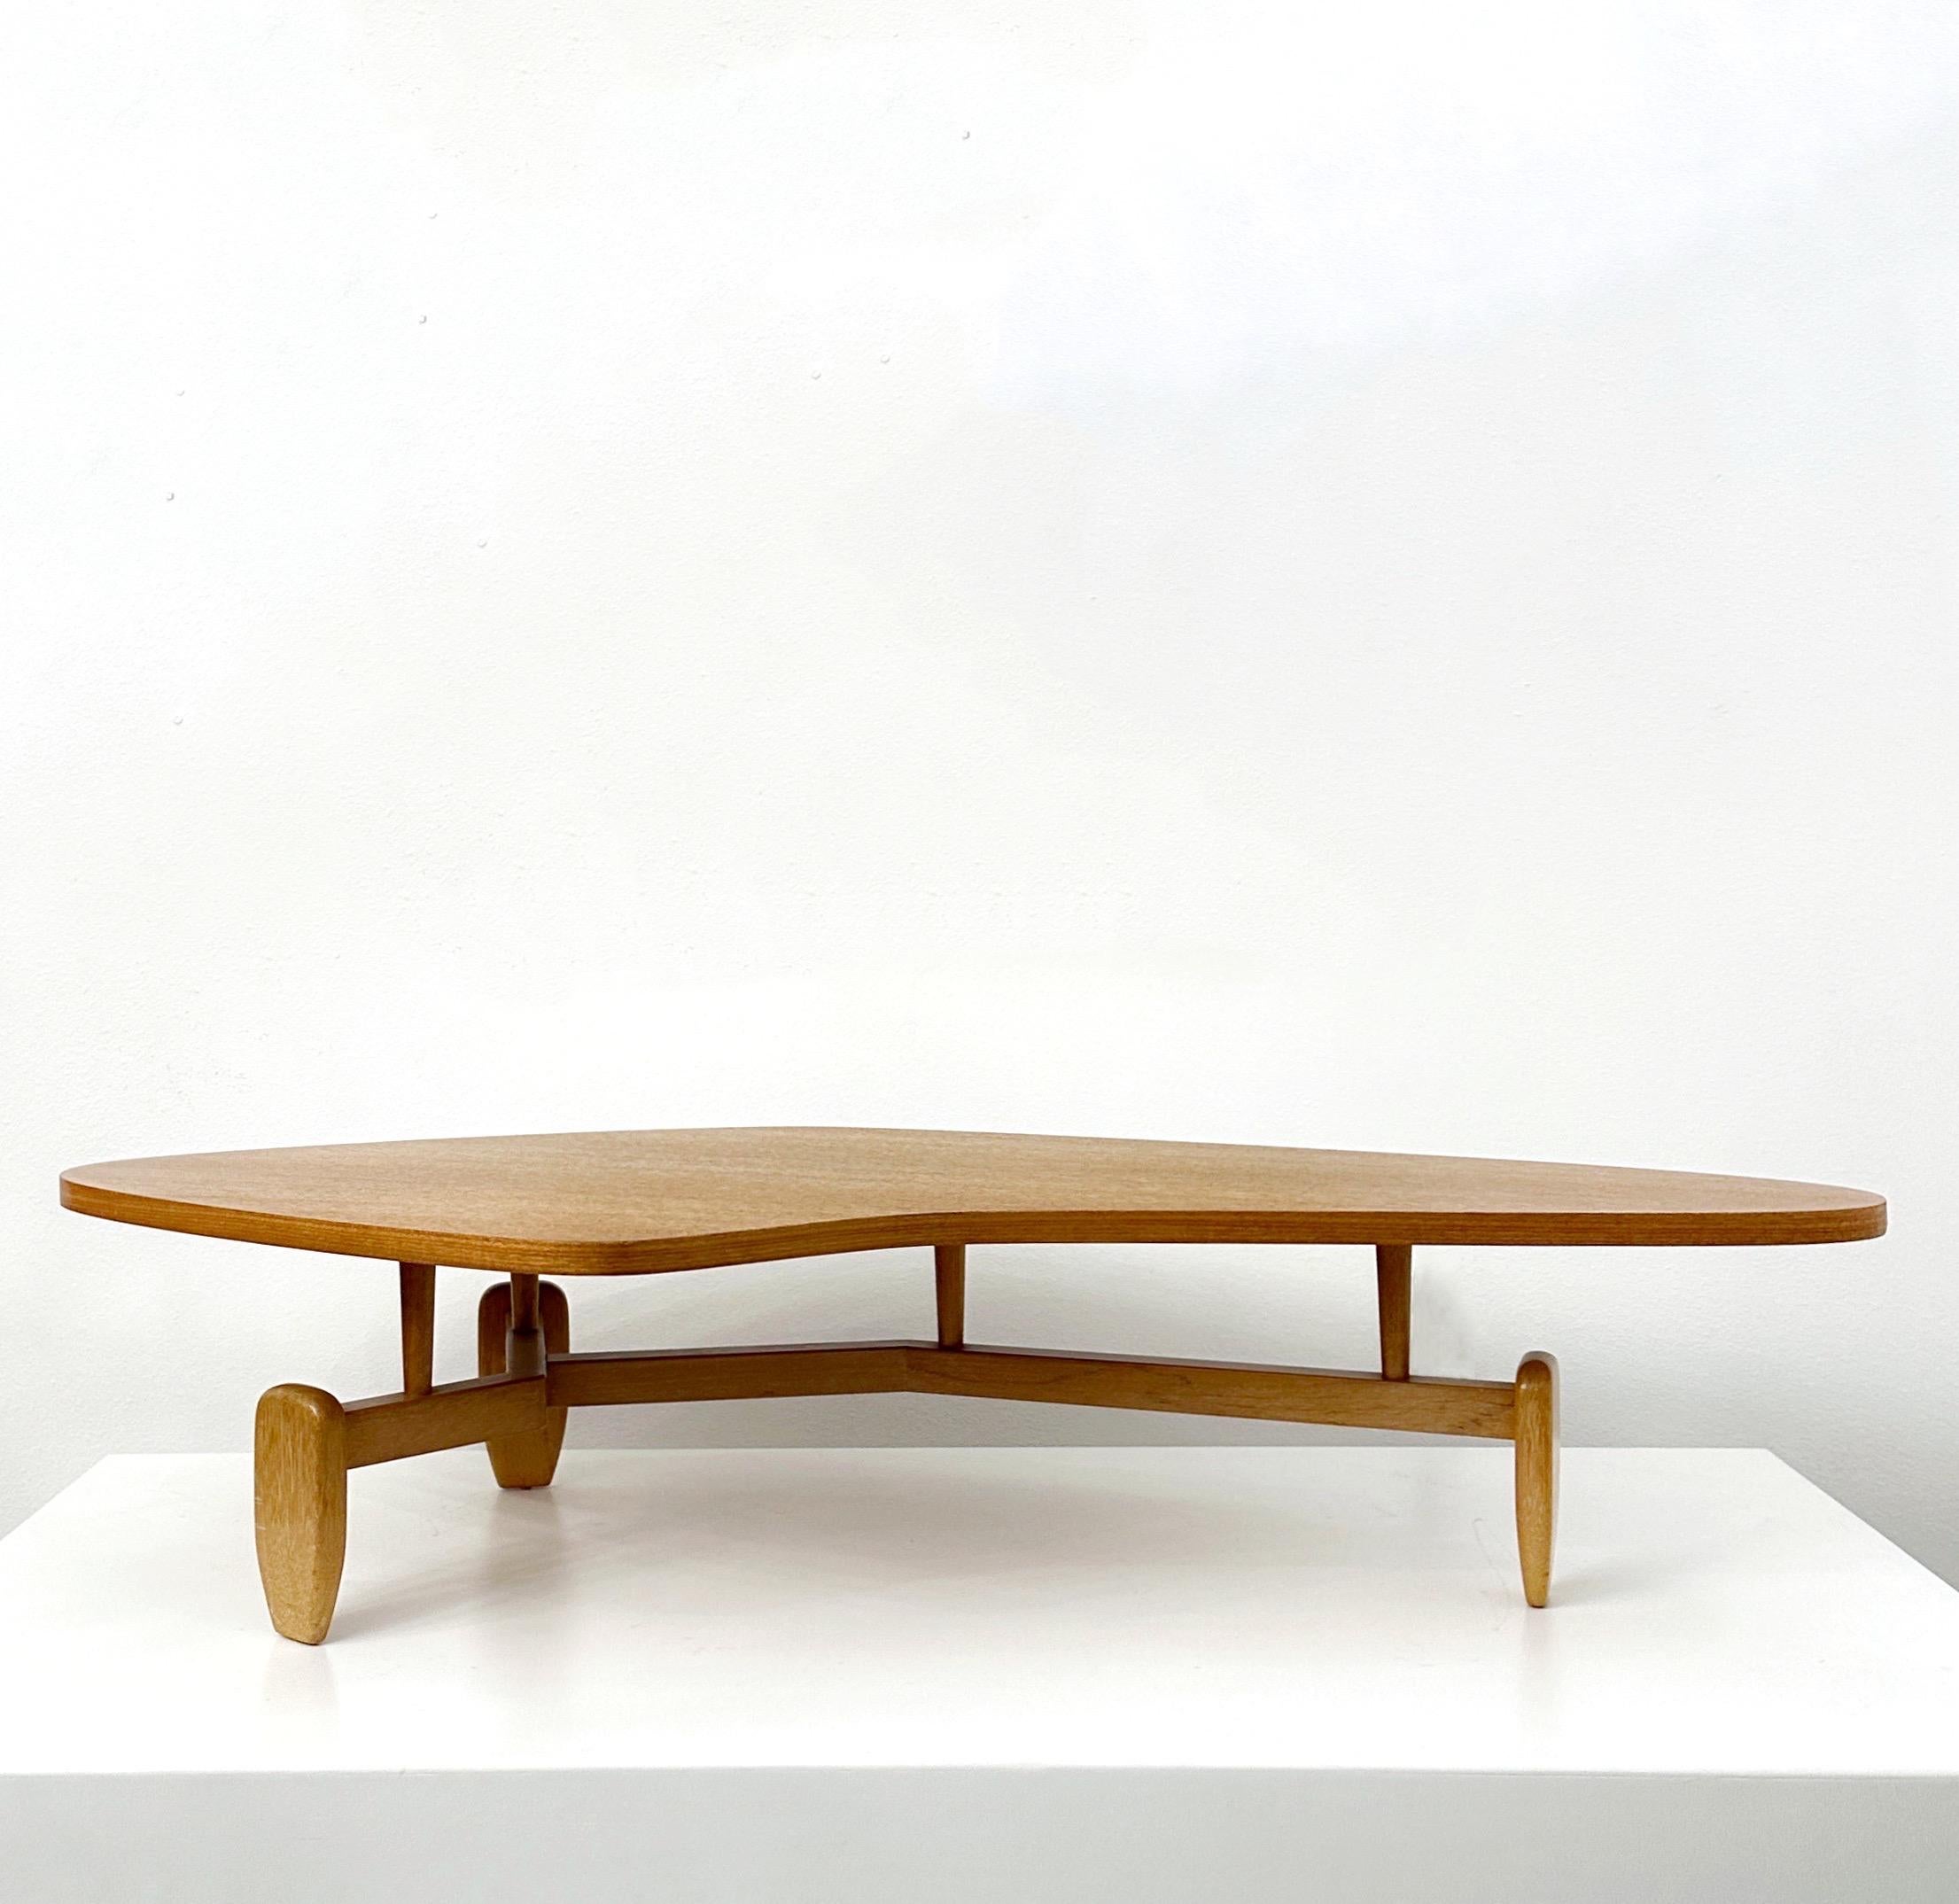 Large and unique biomorphic coffee table designed by John Keal for Brown Saltman of California in the 1950s. This is one of those iconic tables that many people consider among their all-time favorite designs. The unusual shape creates the illusion